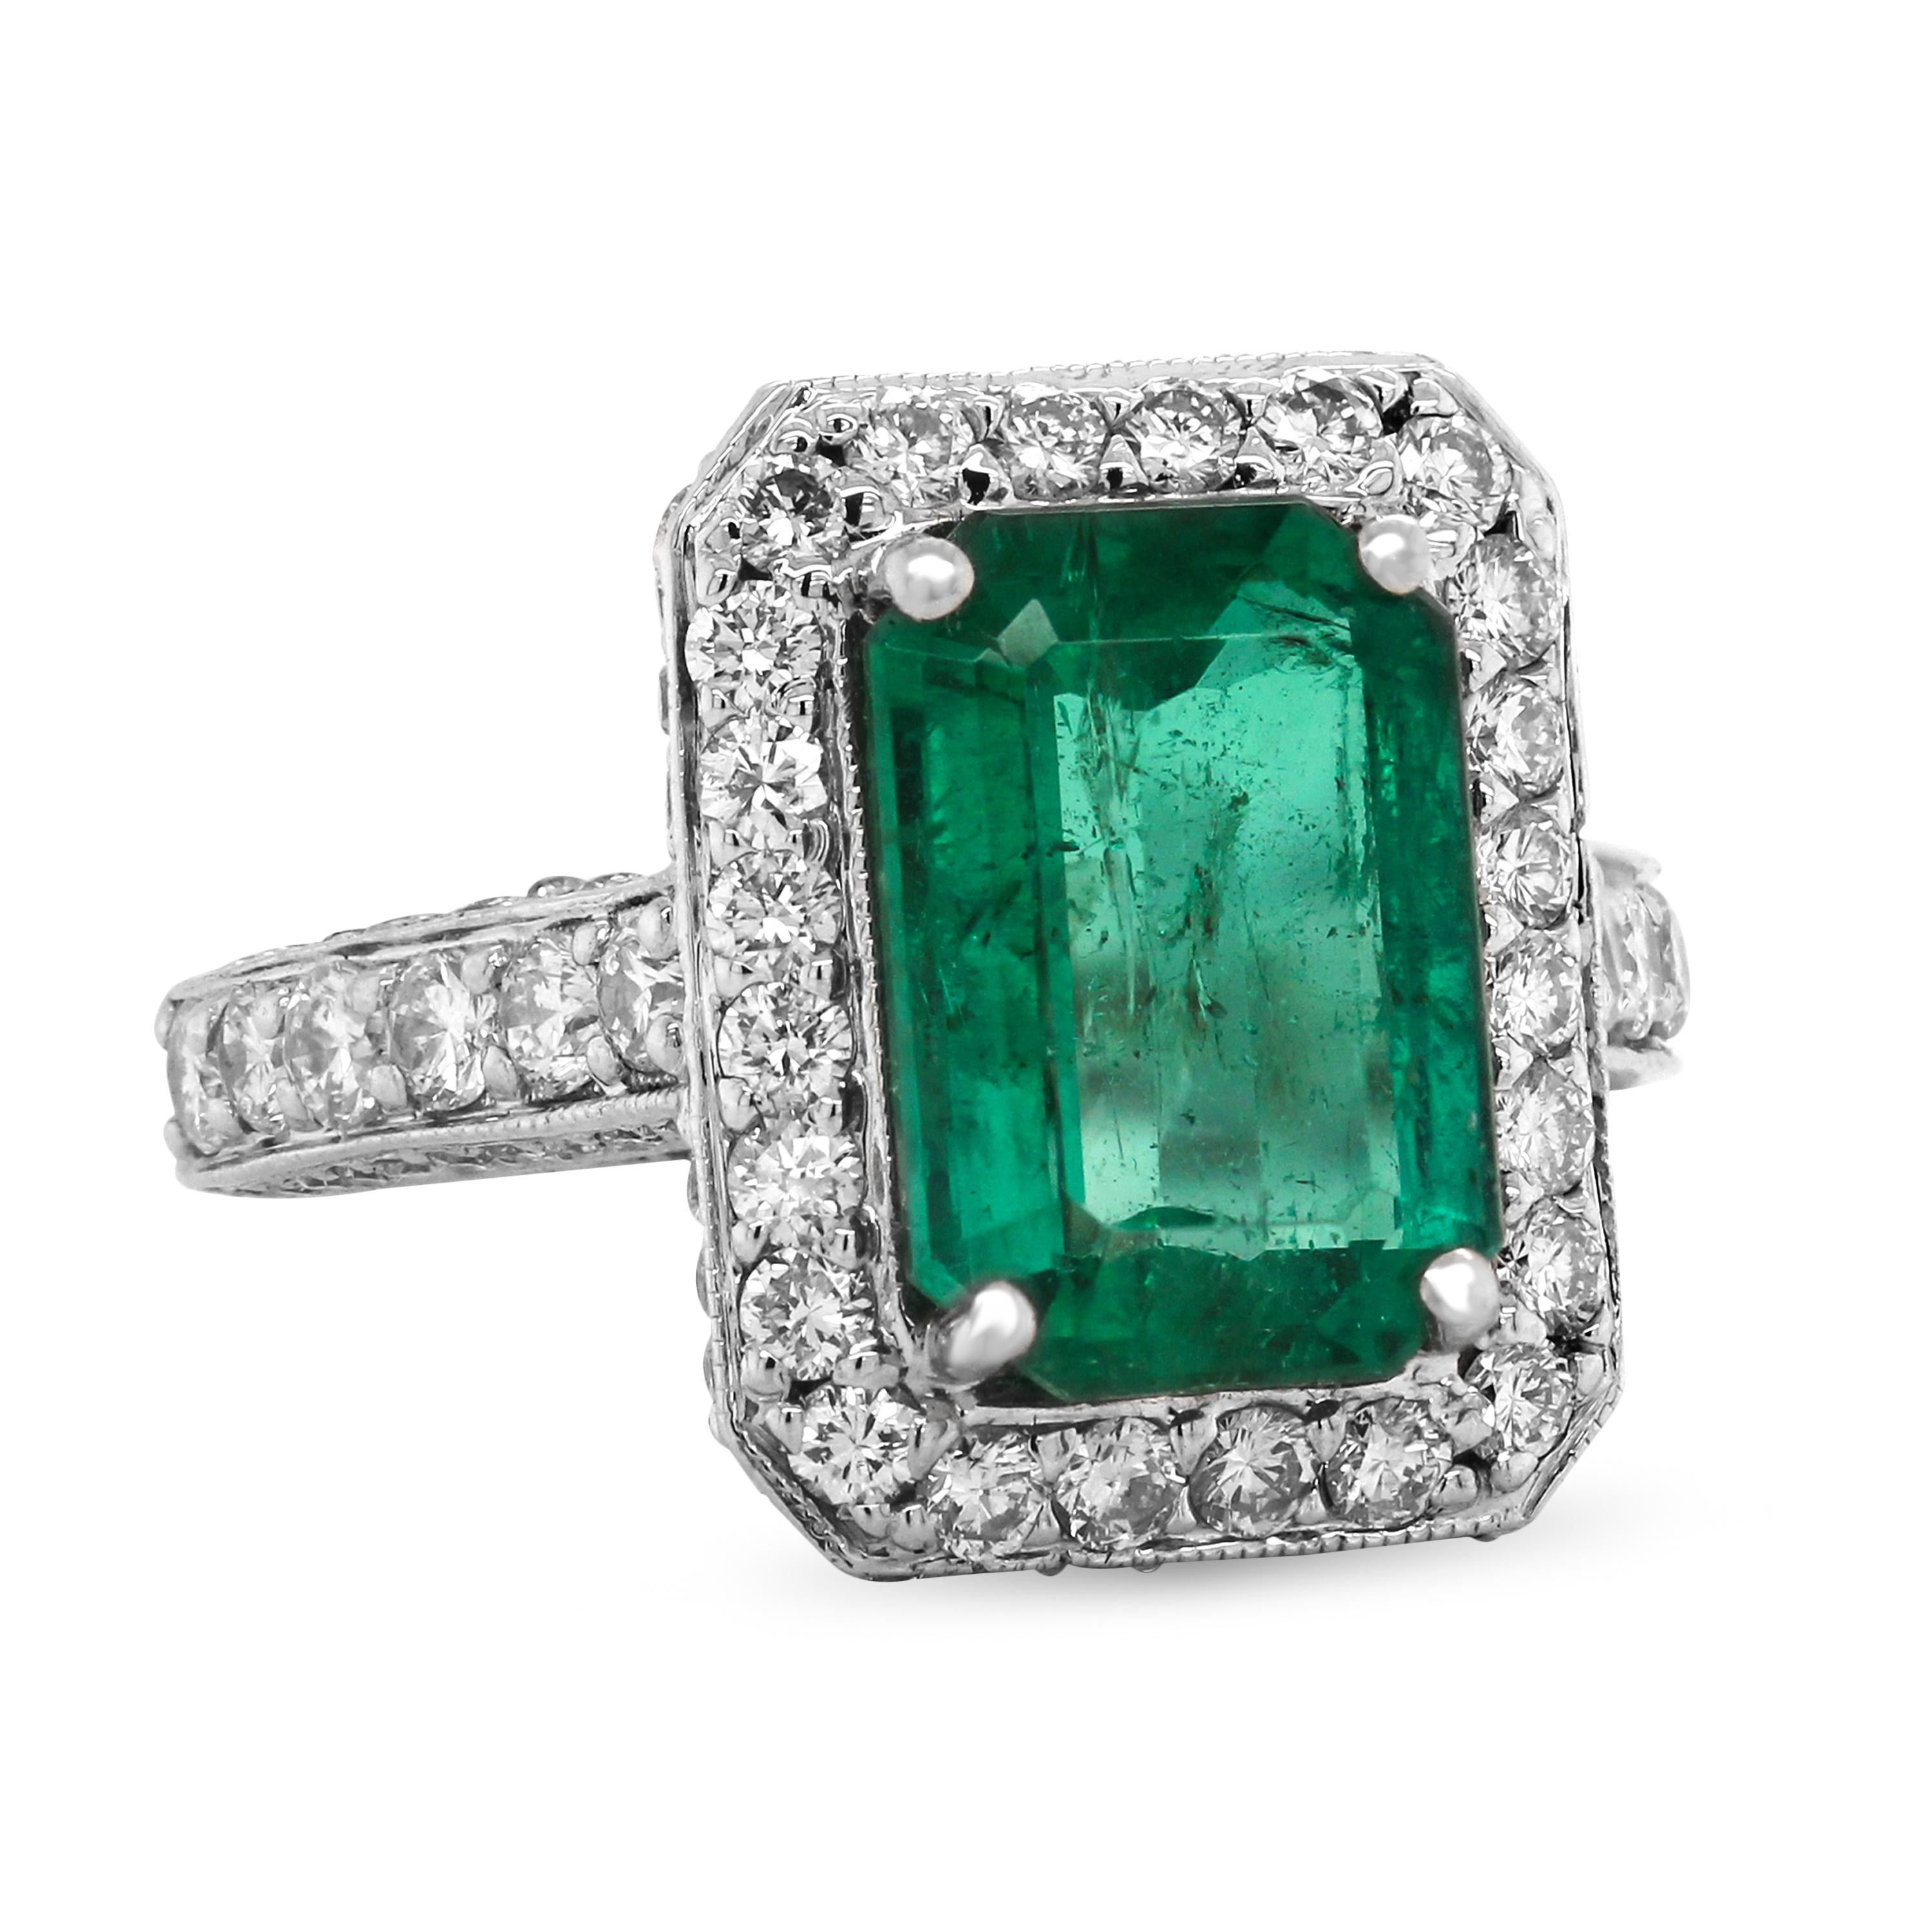 3.37 Carat Emerald 14 Karat White Gold Diamond Cocktail Ring

The center Emerald is not certified however by the color, we suspect to be Zambian origin. 

3.37 Carat Emerald center
Apprx. 1.50 carat diamonds total weight

Ring face is 16mm in width.